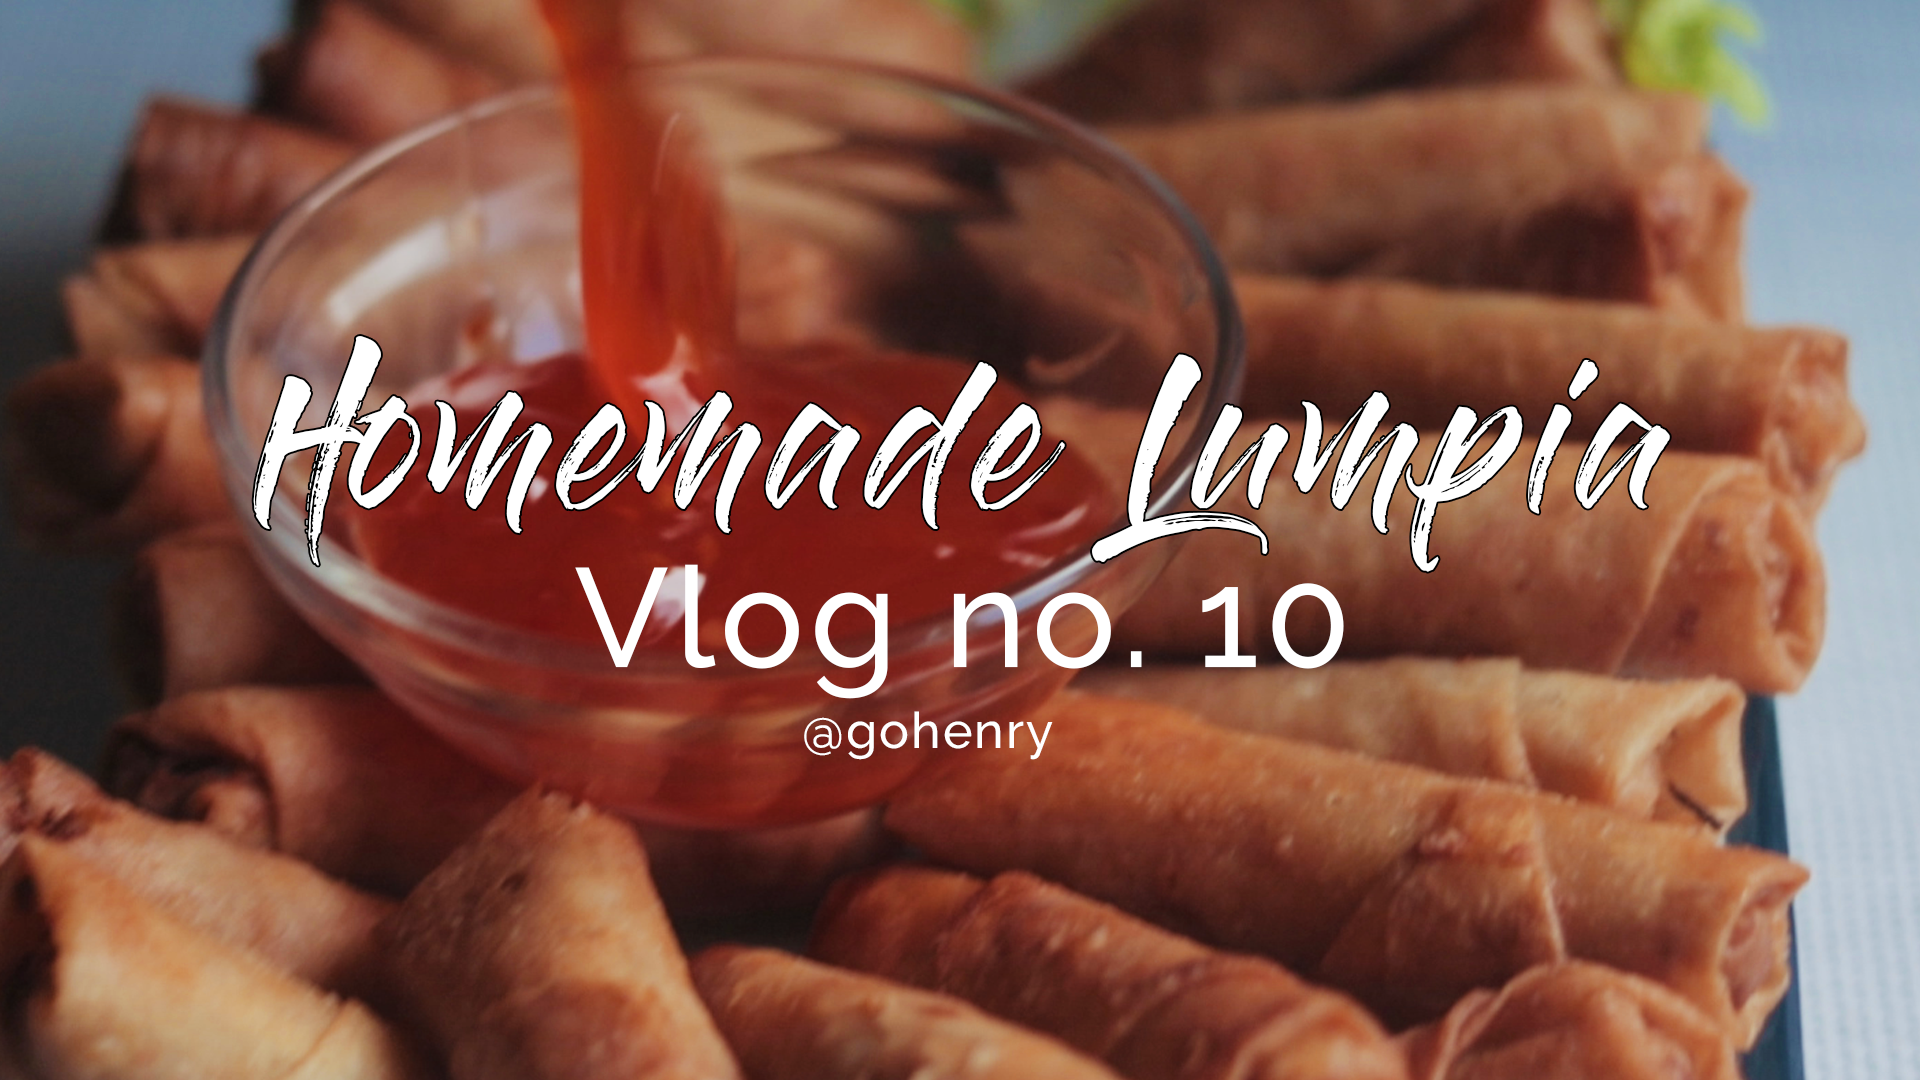 home made lumpia.png